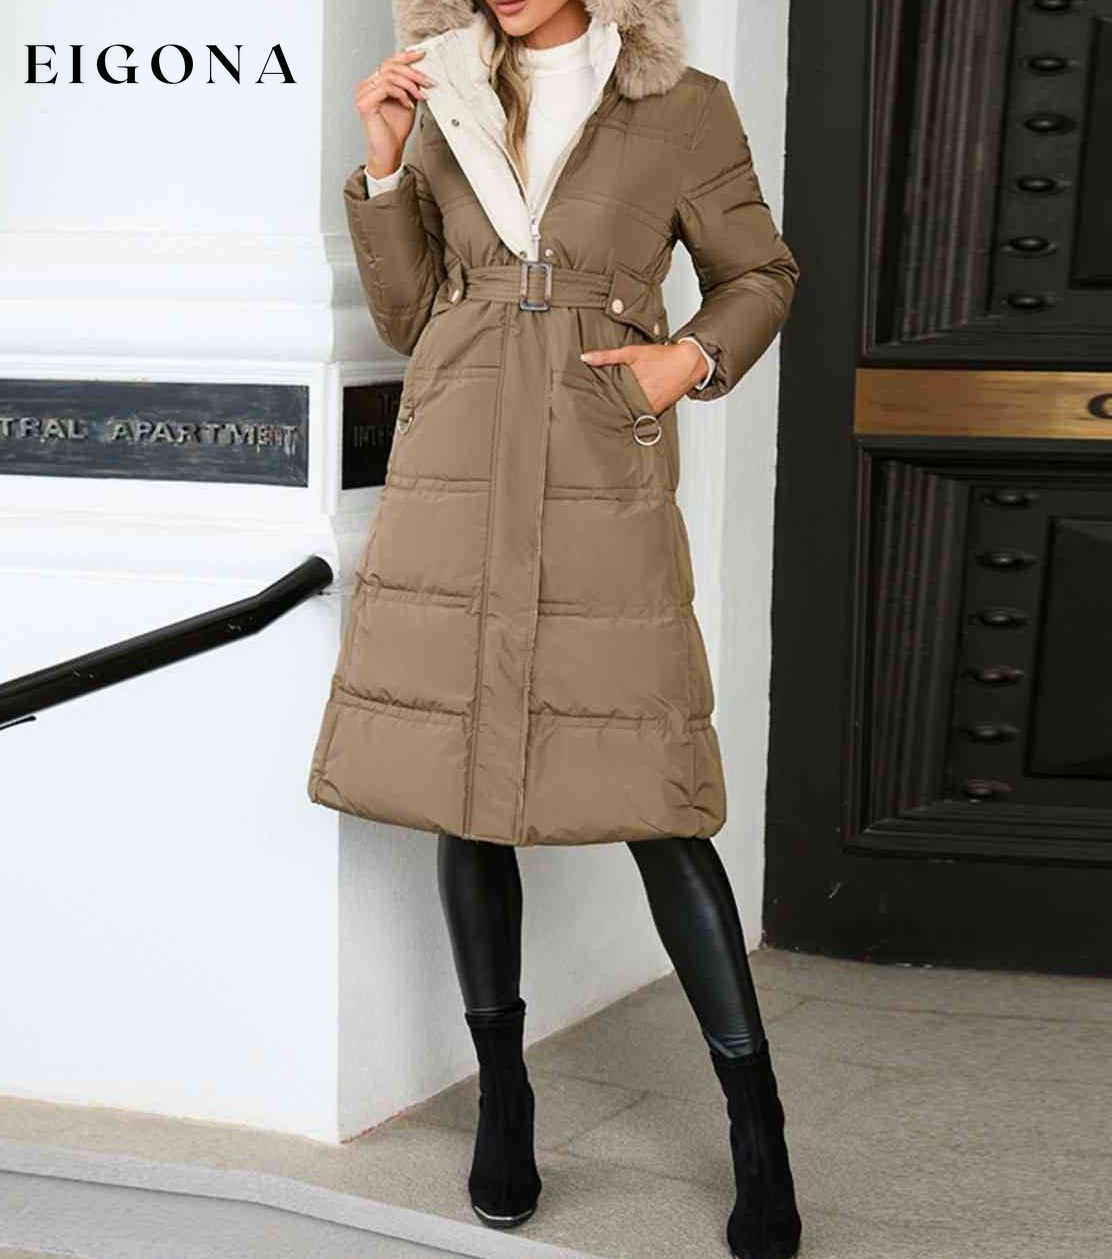 Longline Hooded Winter Coat with Pockets Big coat clothes Coat Cute coats Grey Jacket H.Y.G@E Ship From Overseas Shipping Delay 09/29/2023 - 10/03/2023 Sweaters Winter coat